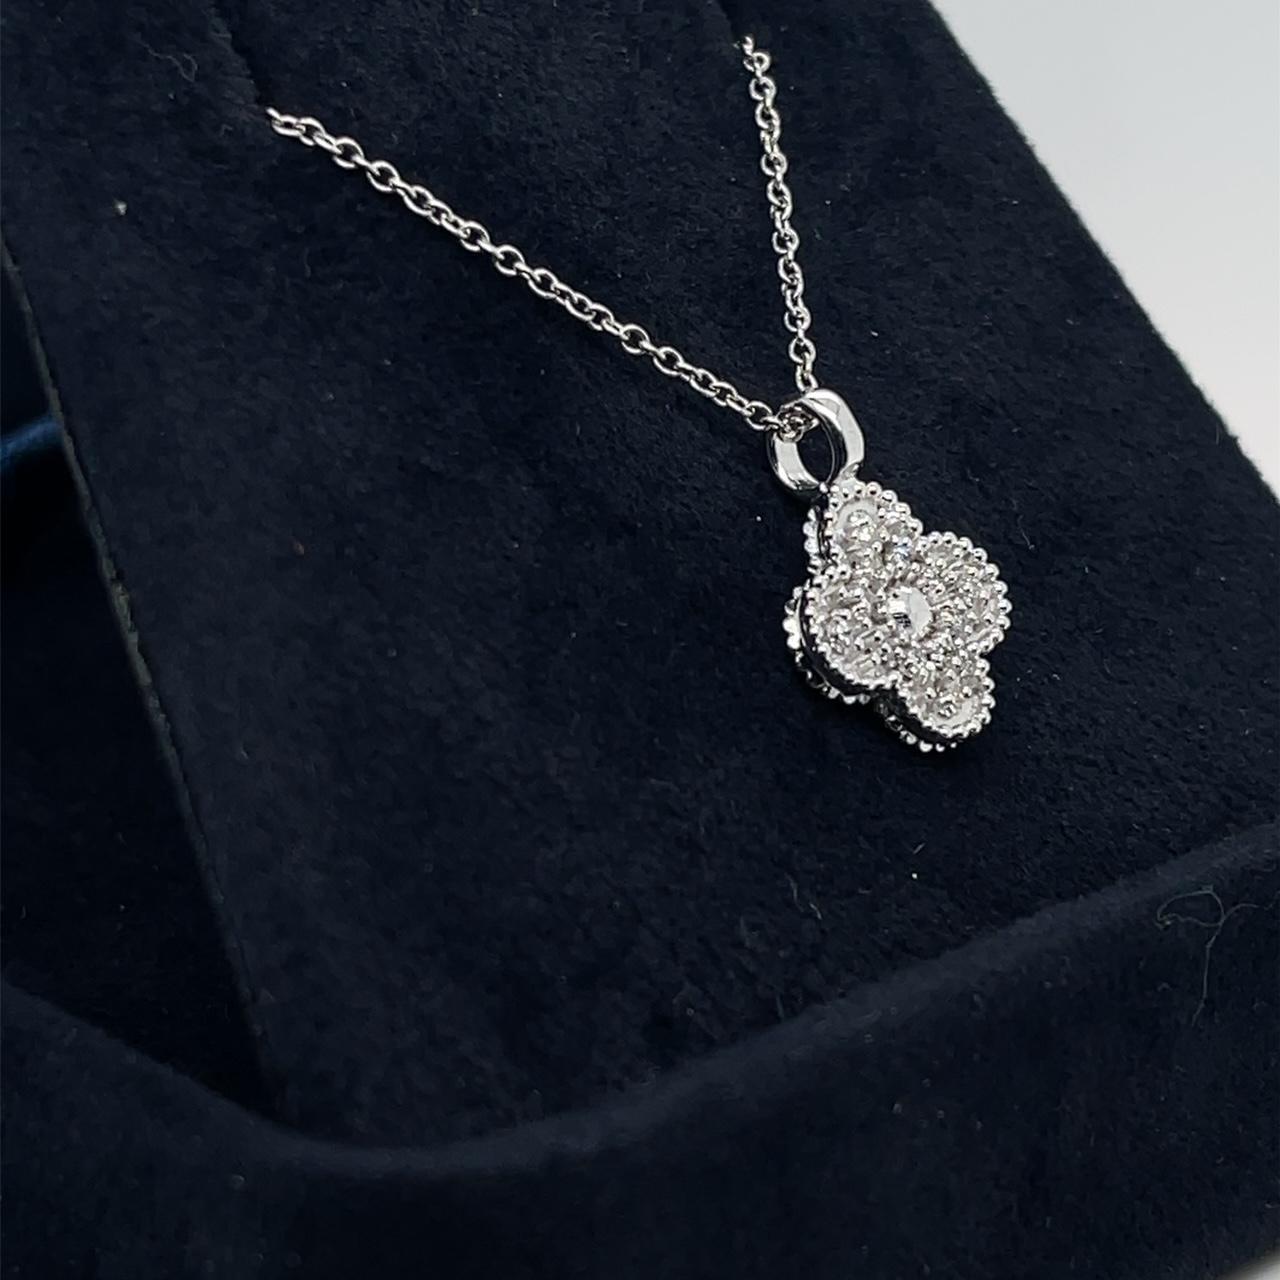 Contemporary Diamond Clover Necklace in 18k White Gold set with 1/5 carat Diamonds